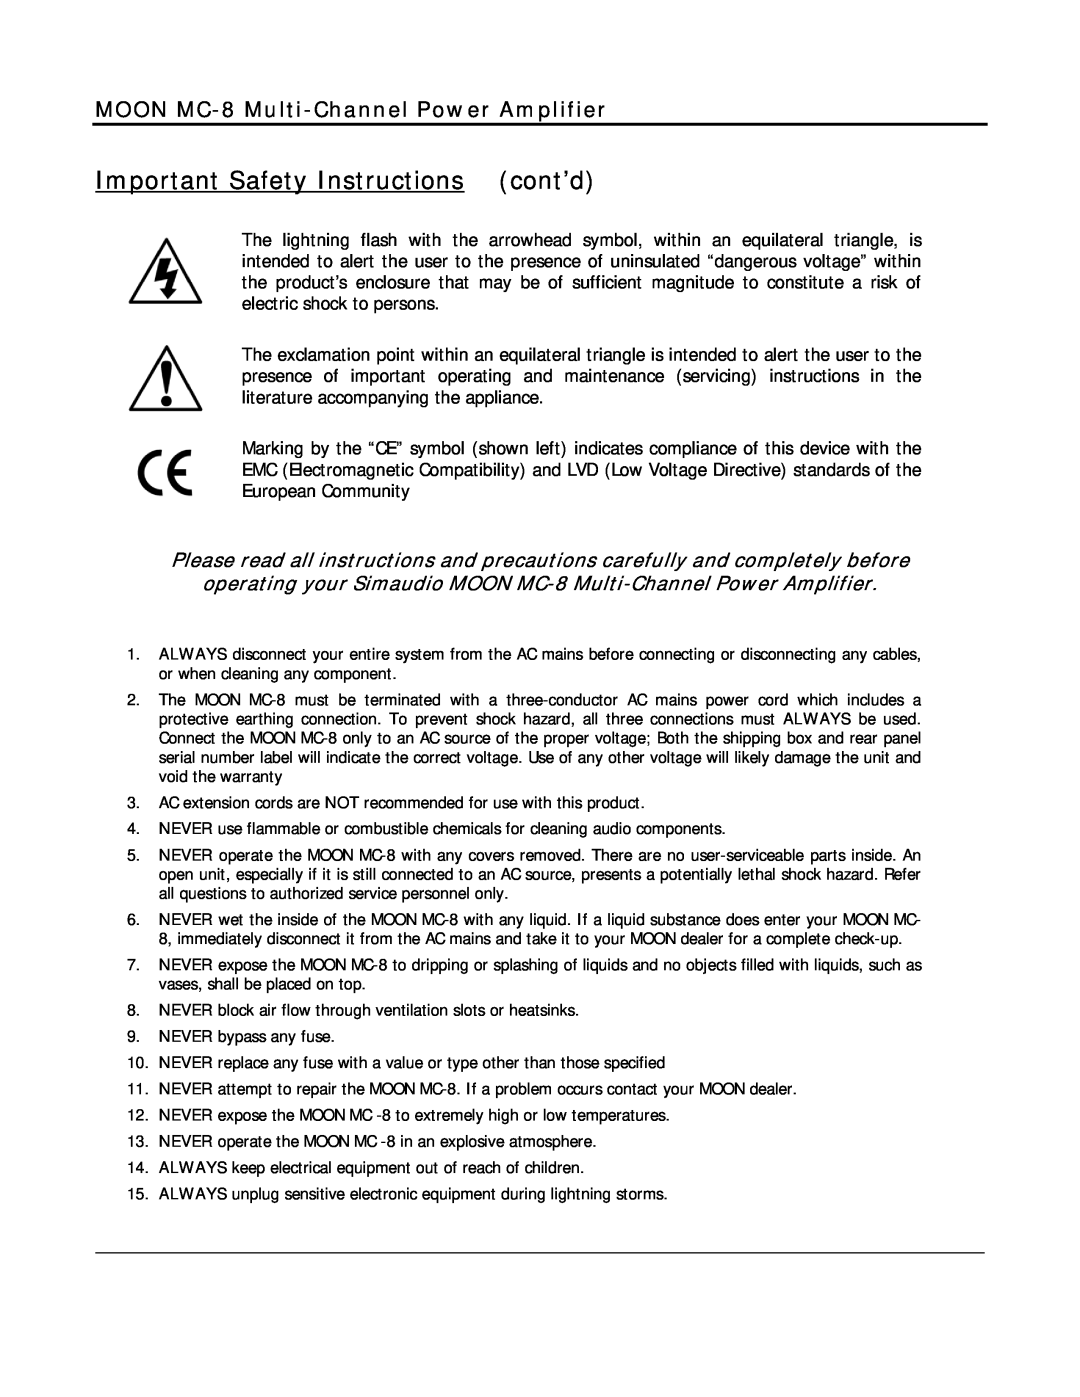 Simaudio owner manual Important Safety Instructionscont’d, MOON MC-8 Multi-ChannelPower Amplifier 